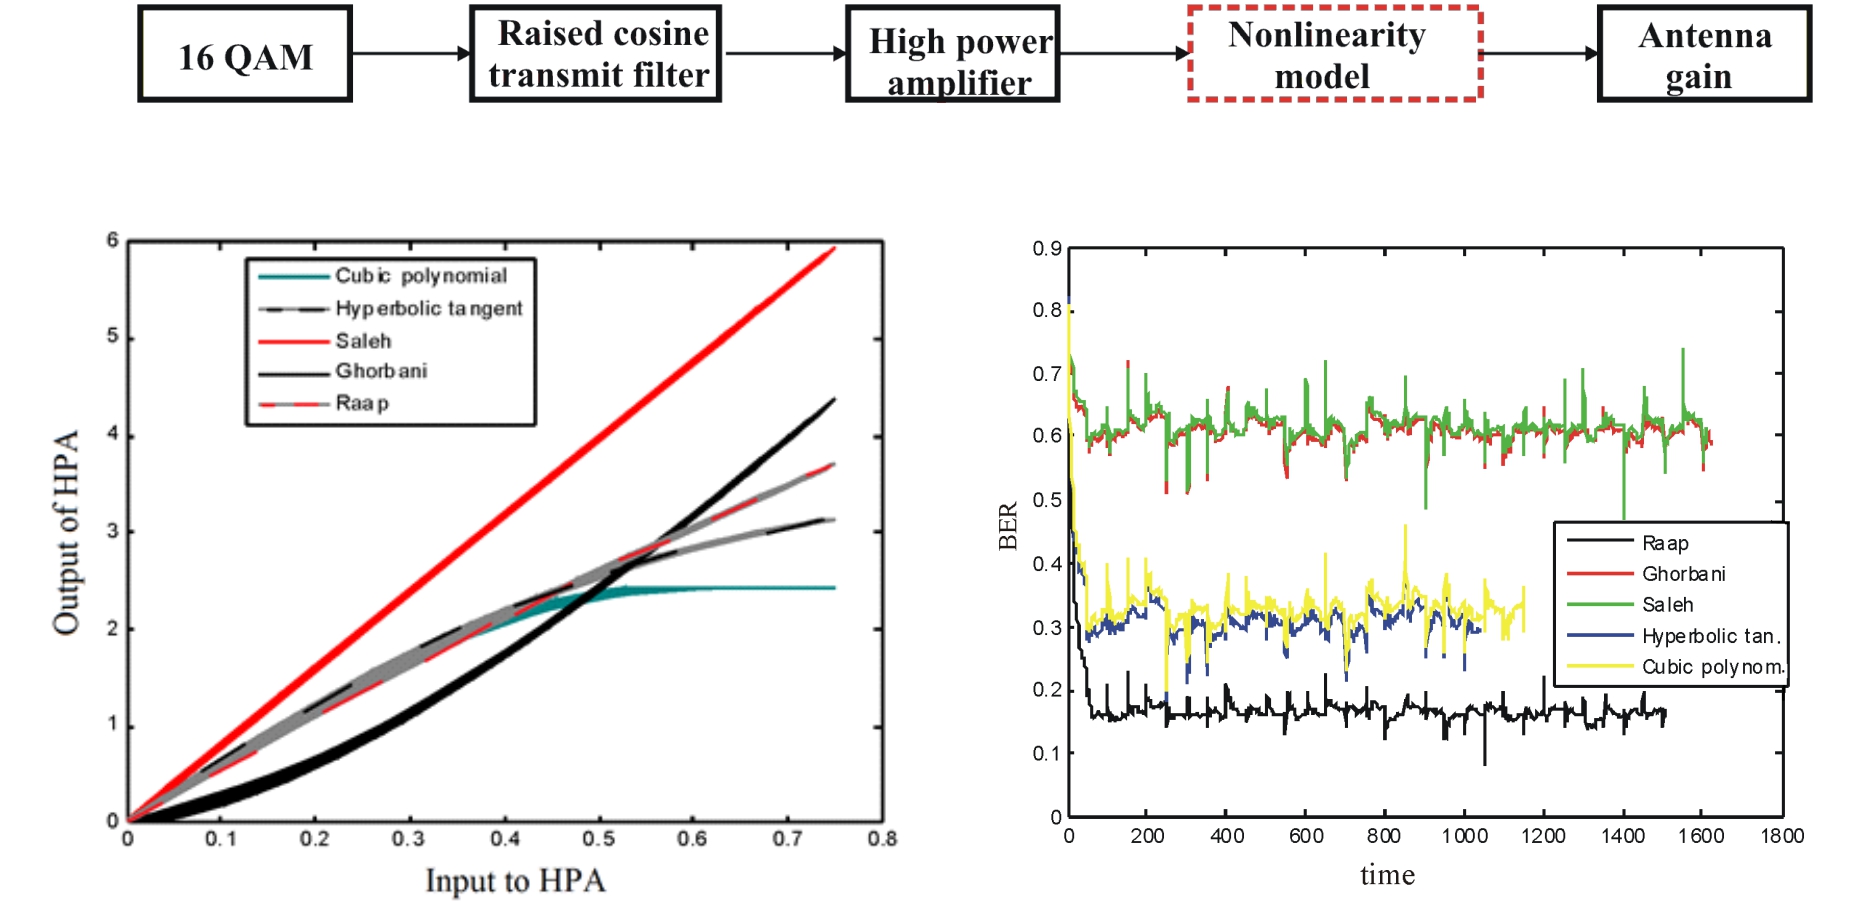 Nonlinearities Influence to RF Satellite Downlink Model with QAM and Raised Square Cosine Filter